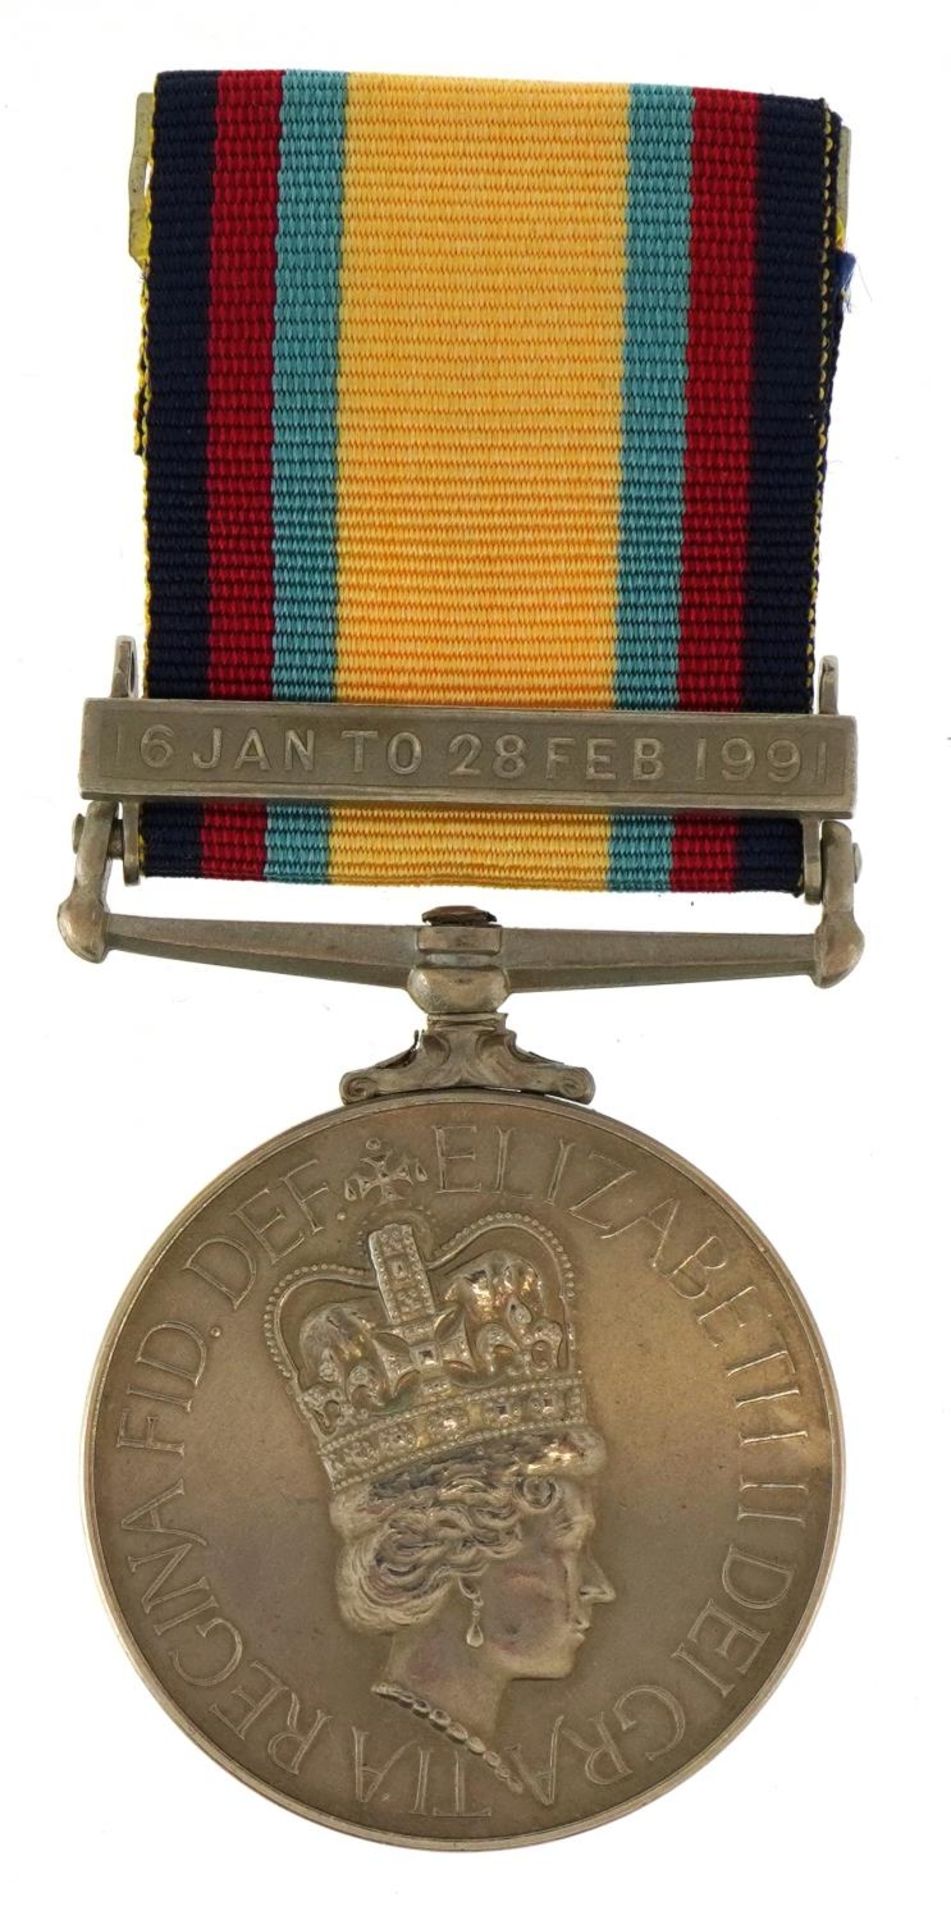 British military Elizabeth II Gulf medal with 16 Jan to 28 Feb 1991 bar awarded to MM4 A A MILEA - Image 2 of 4